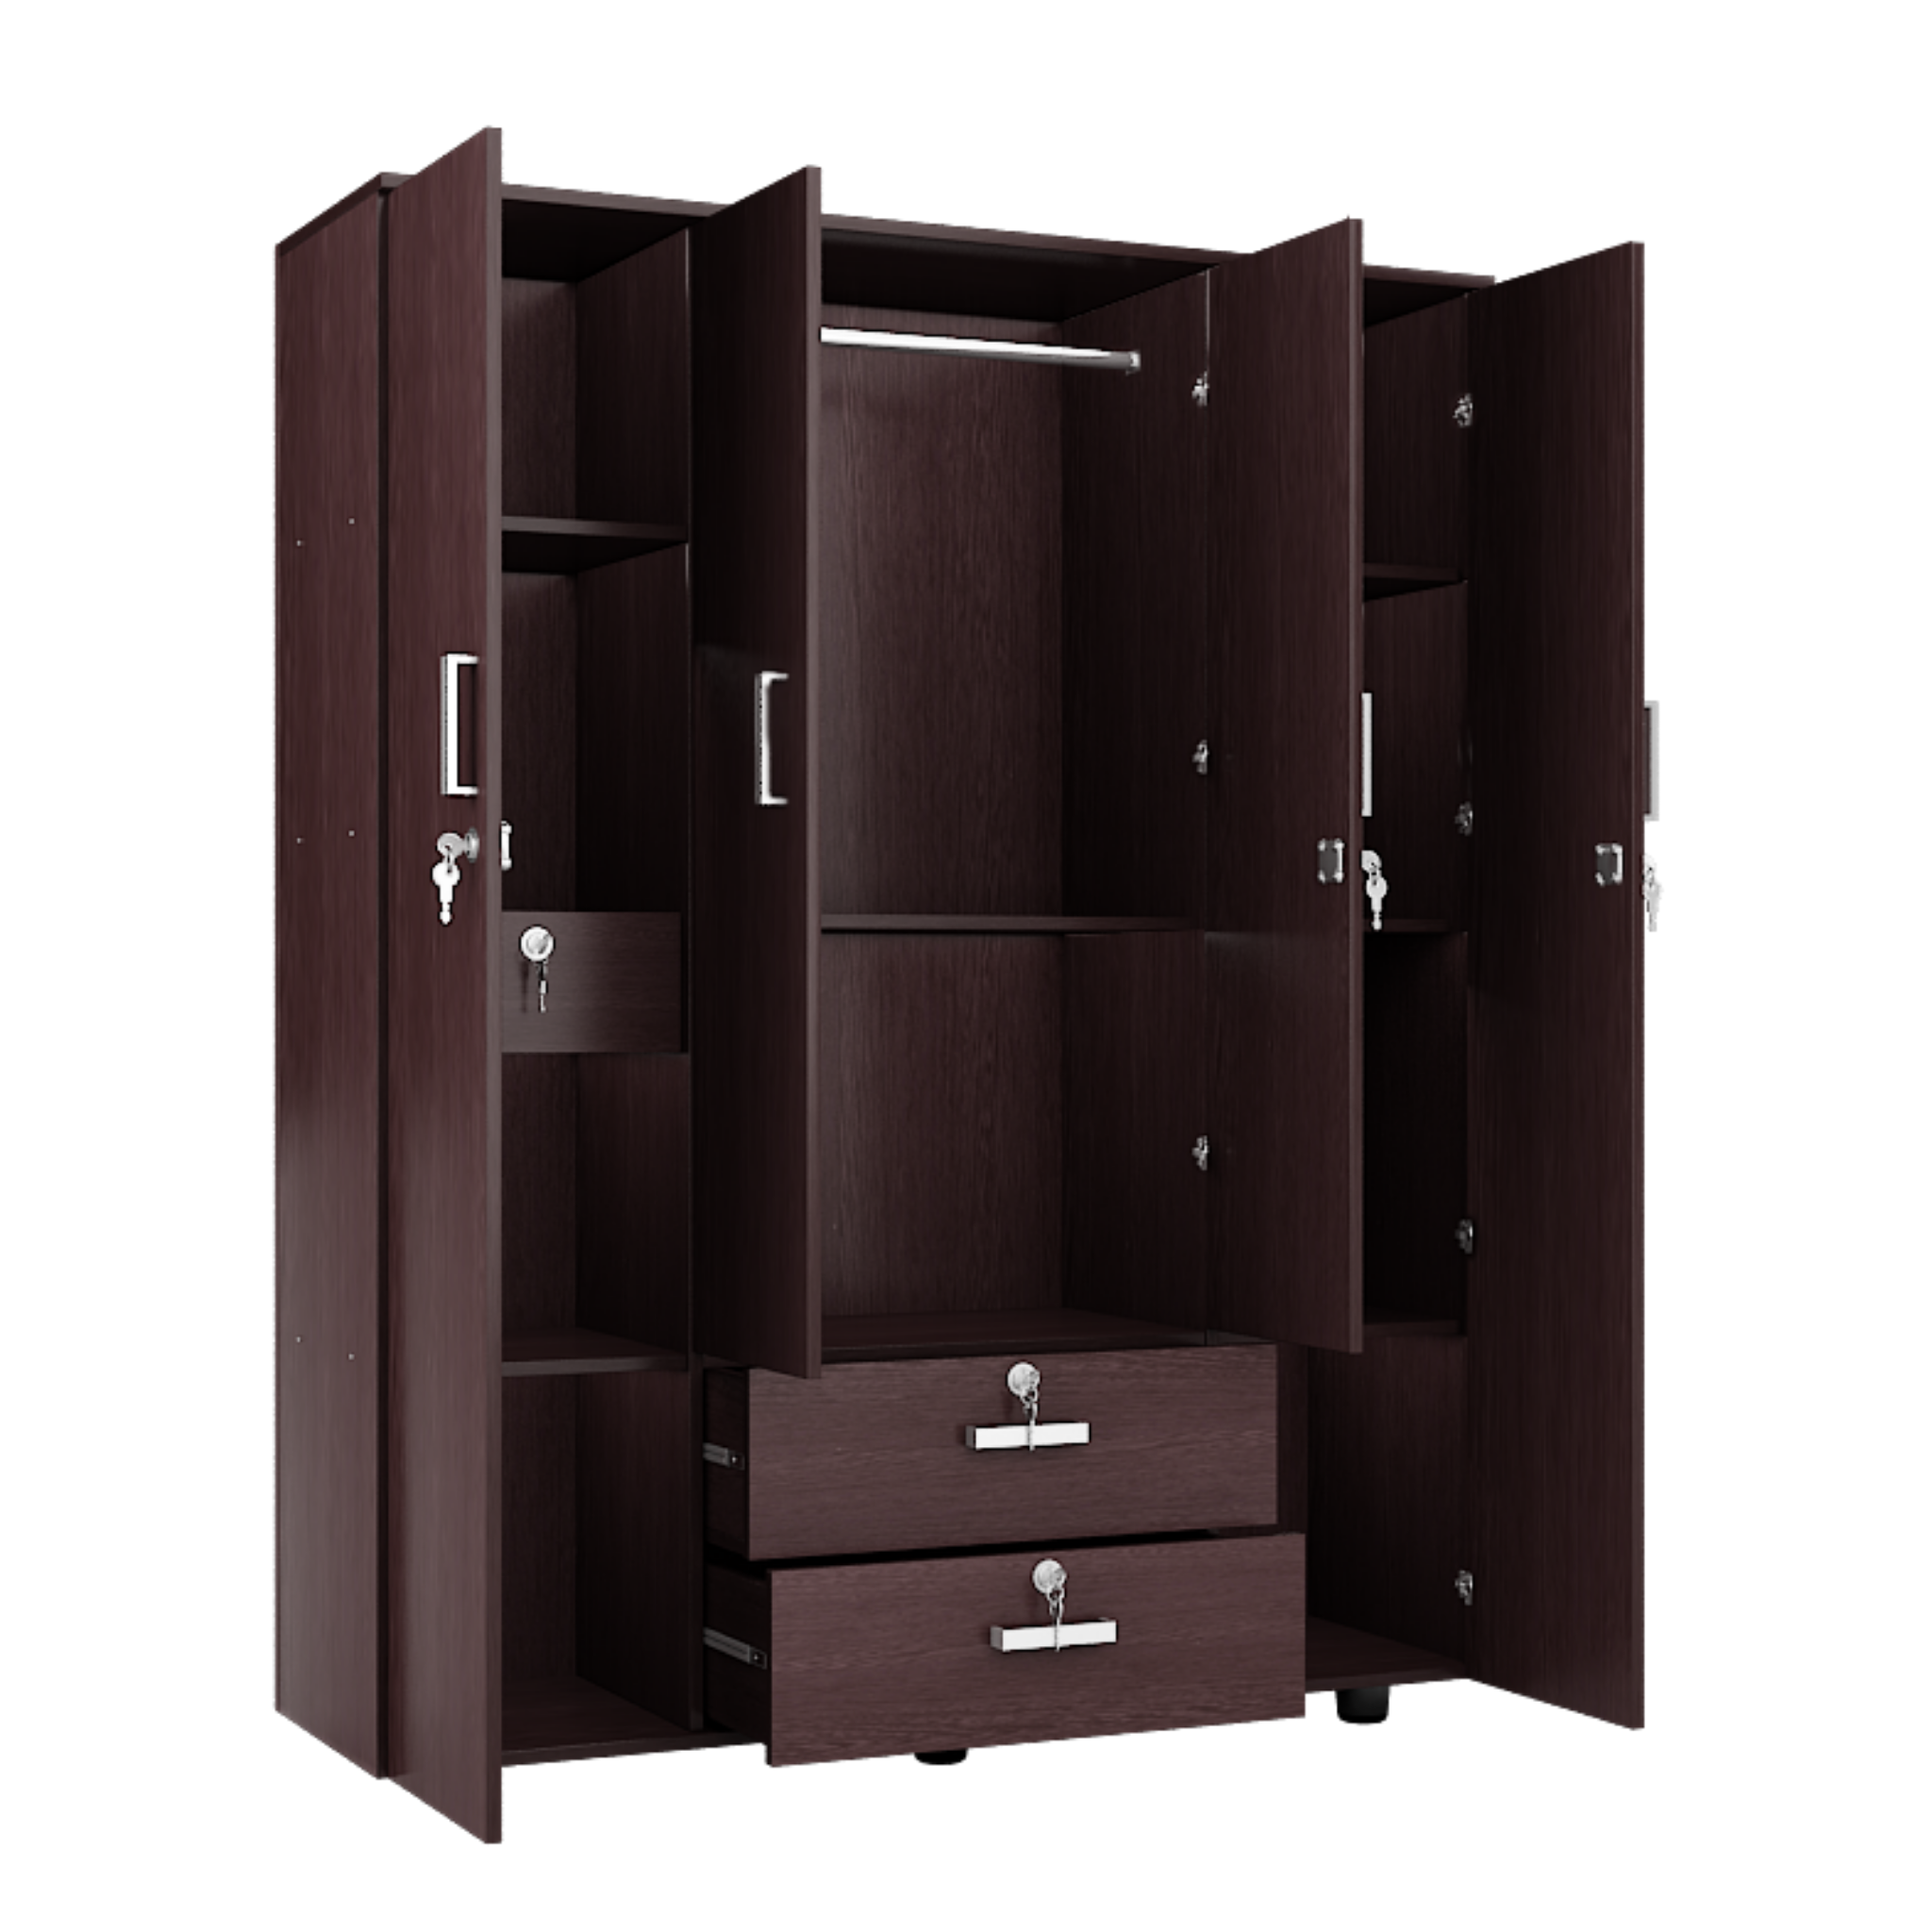 Super and Luxury Four Door Wardrobe with Pull Drawer